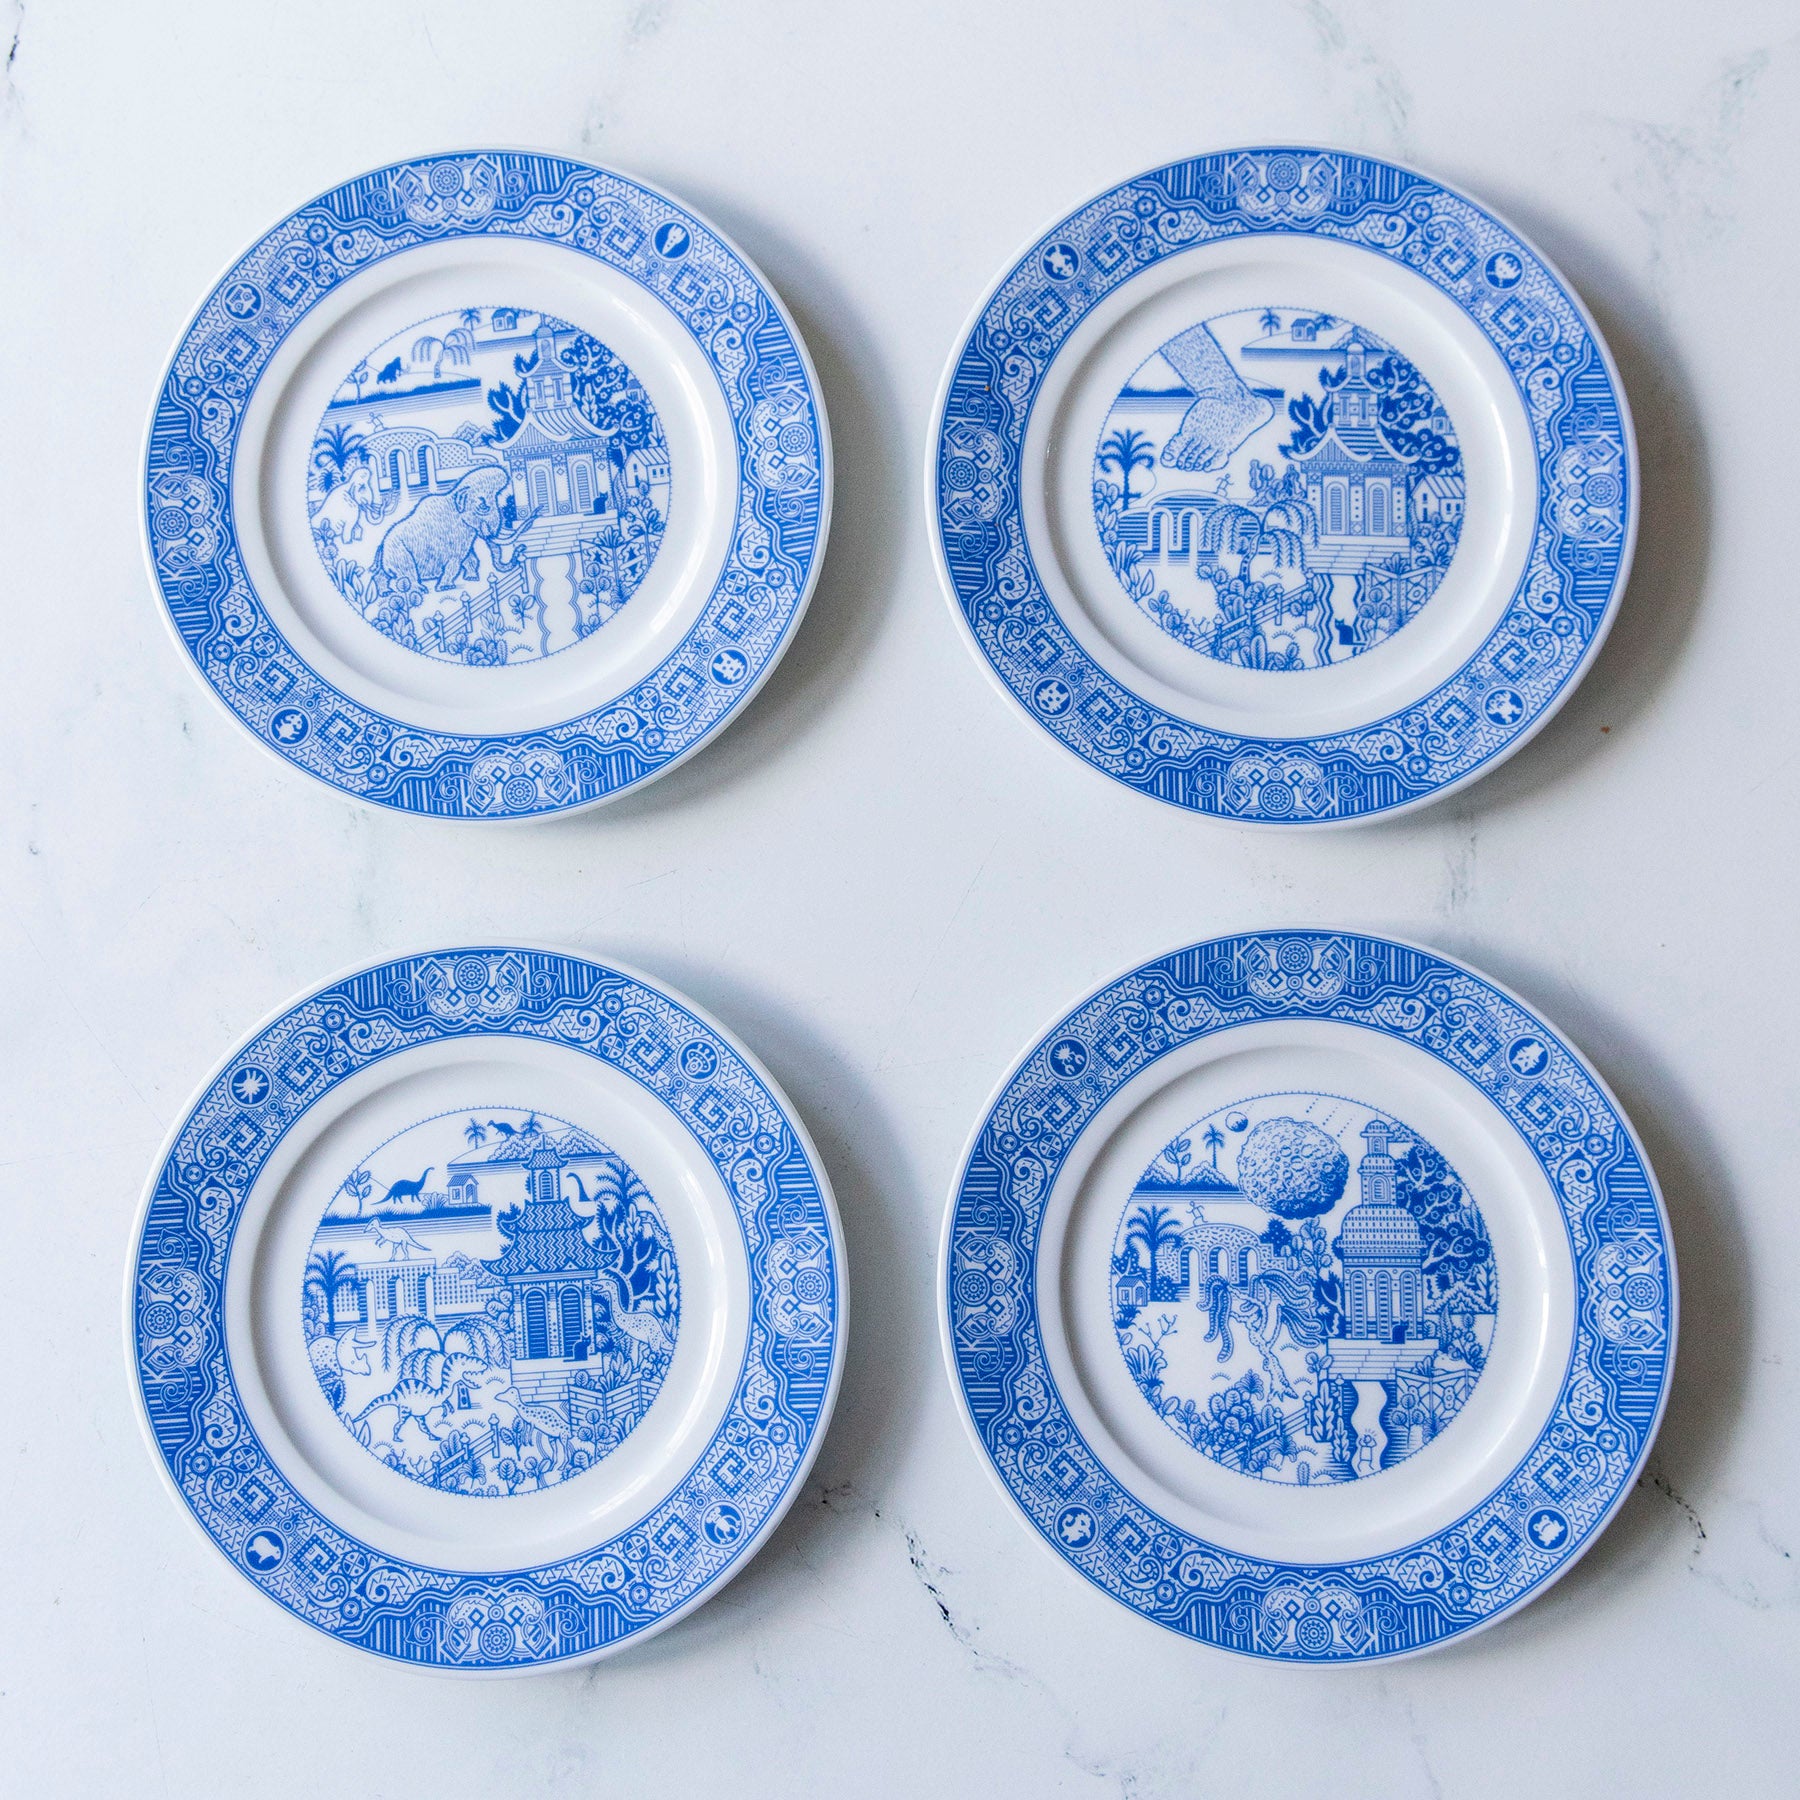 Vexations Small Plates (Set of 4)